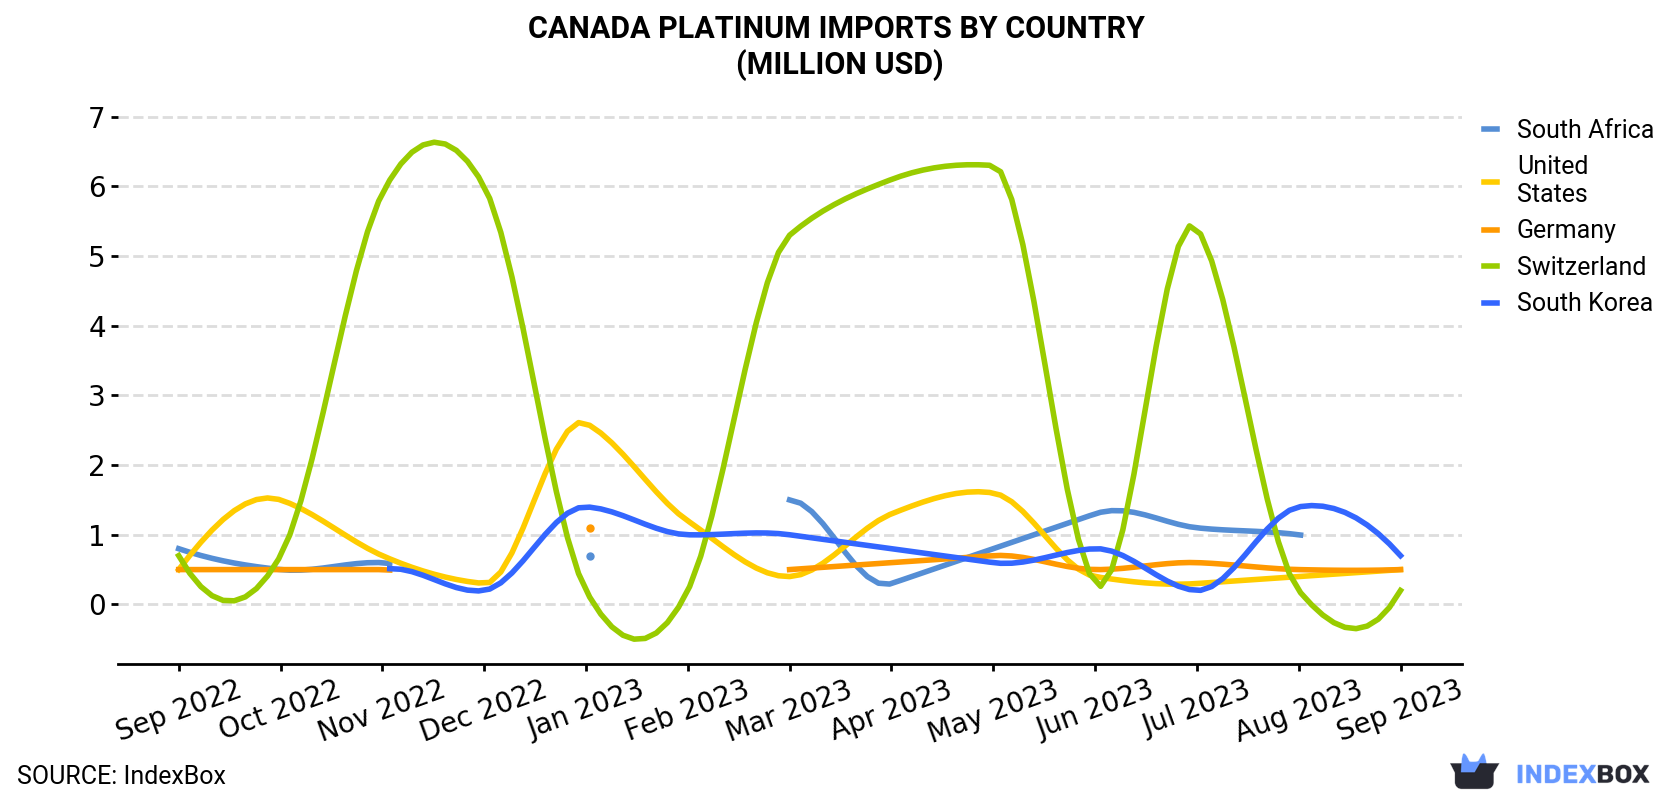 Canada Platinum Imports By Country (Million USD)